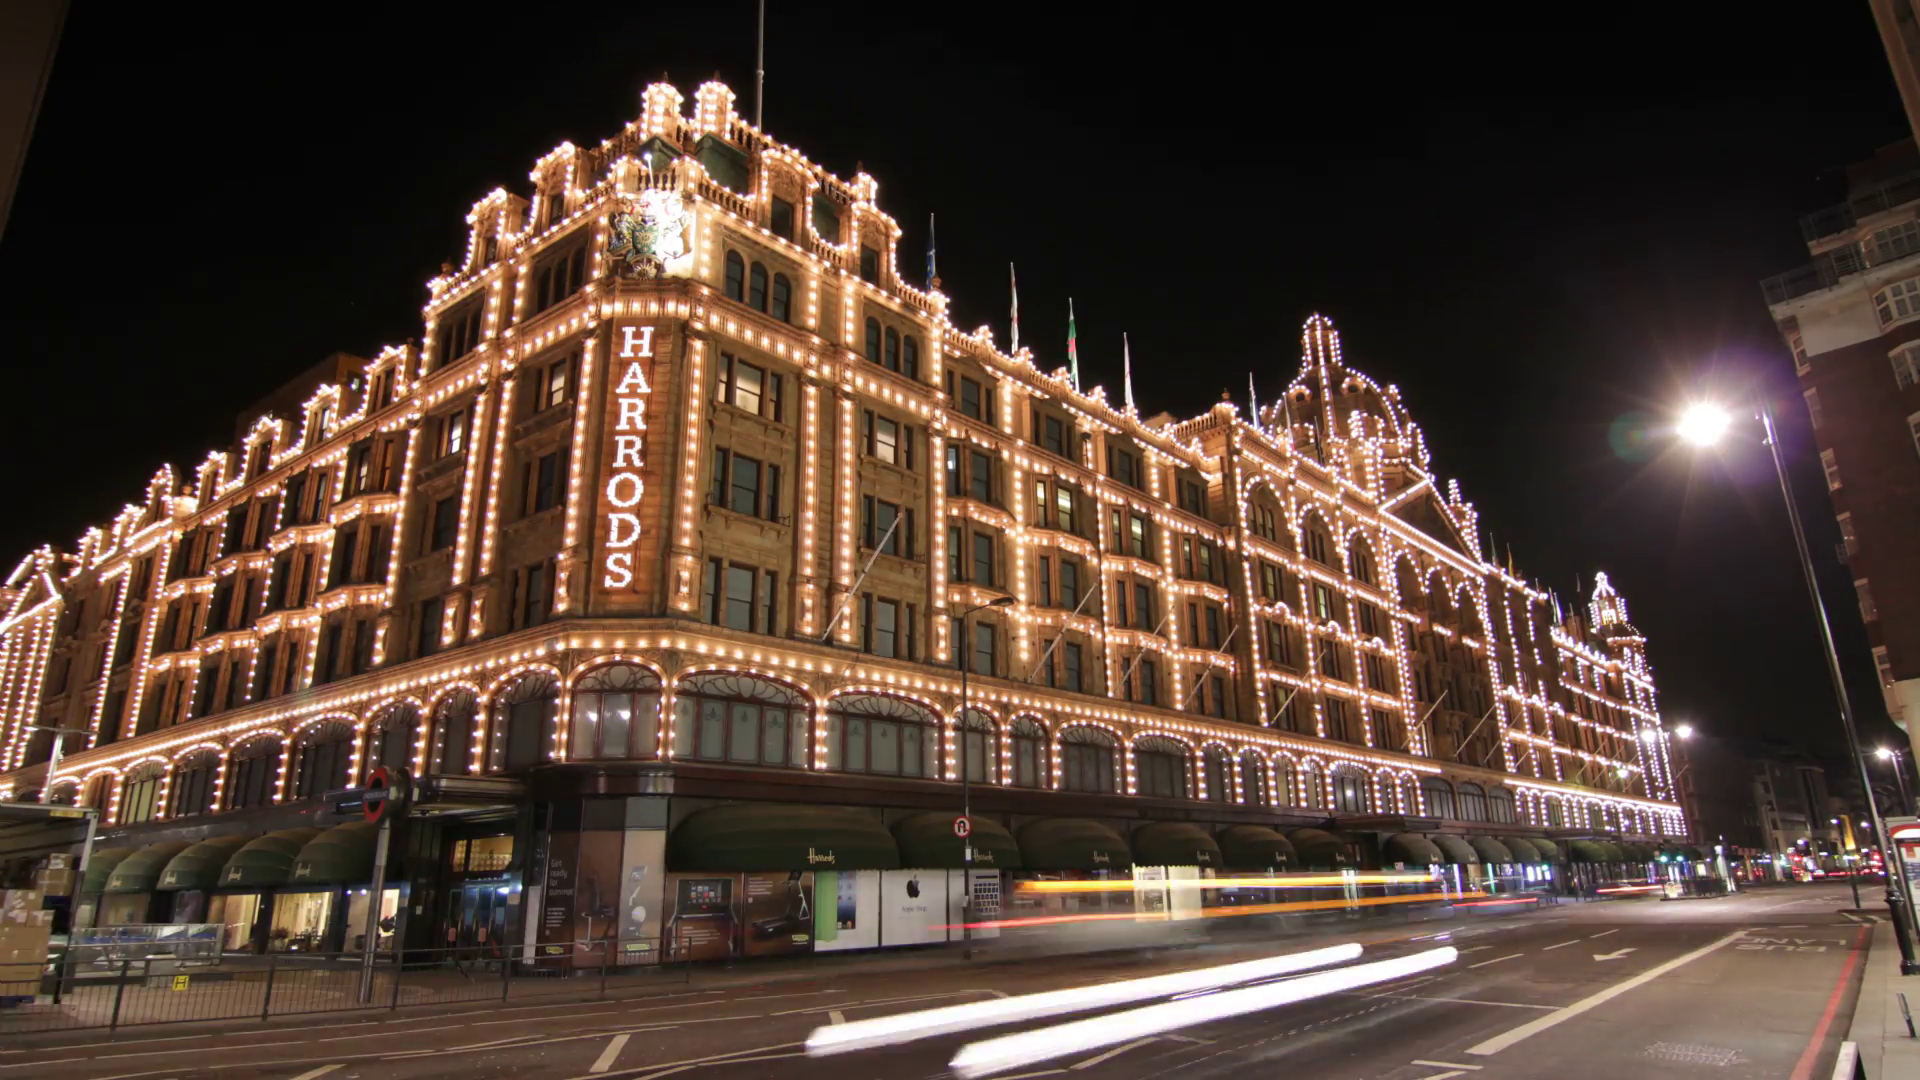 LONDON, UK - April 3rd: Time lapse of Harrods department store at ...